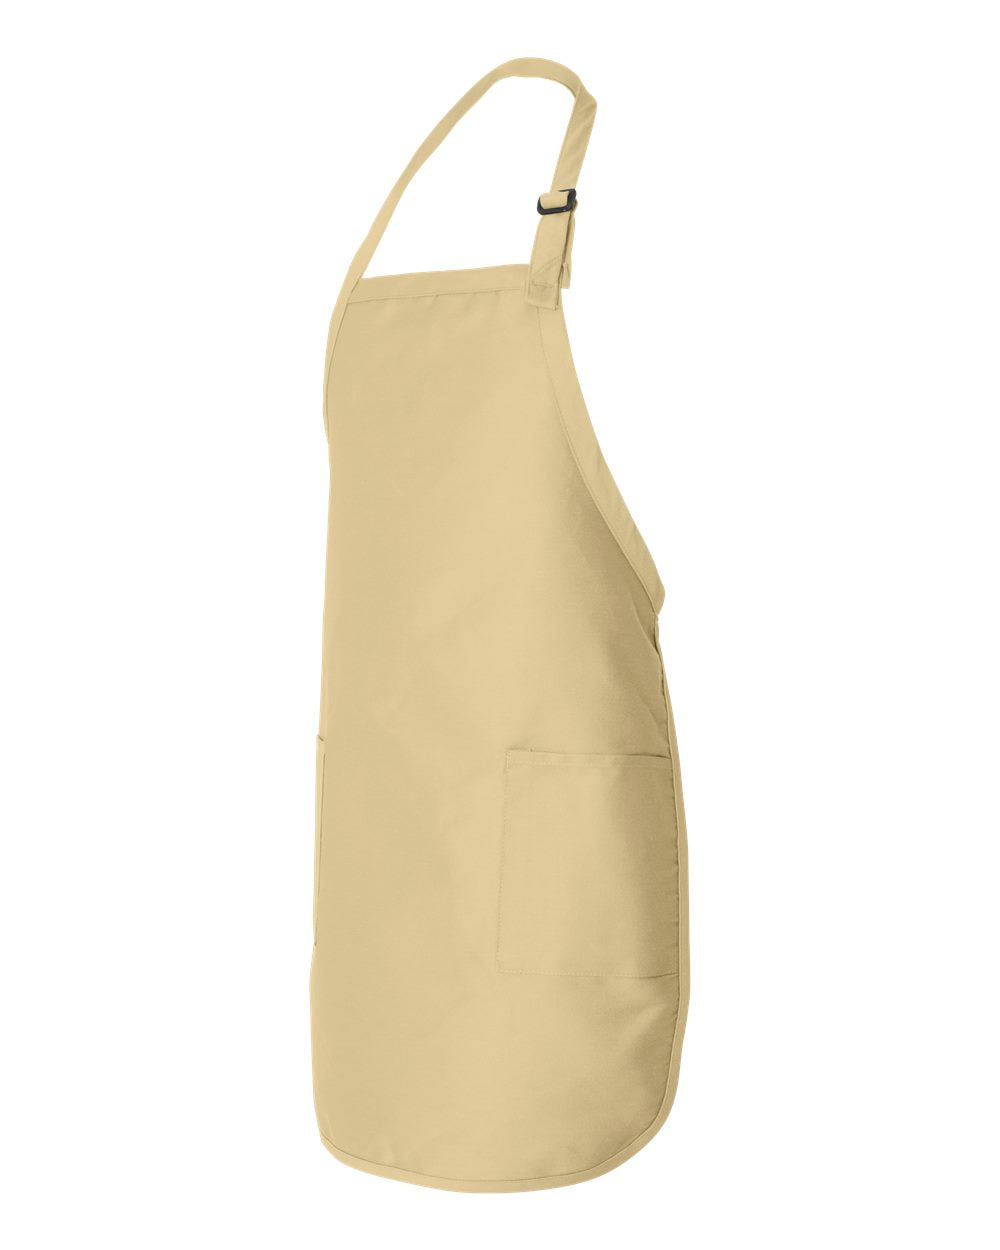 Q-Tees Full-Length Apron with Pockets Q4350 #color_Natural